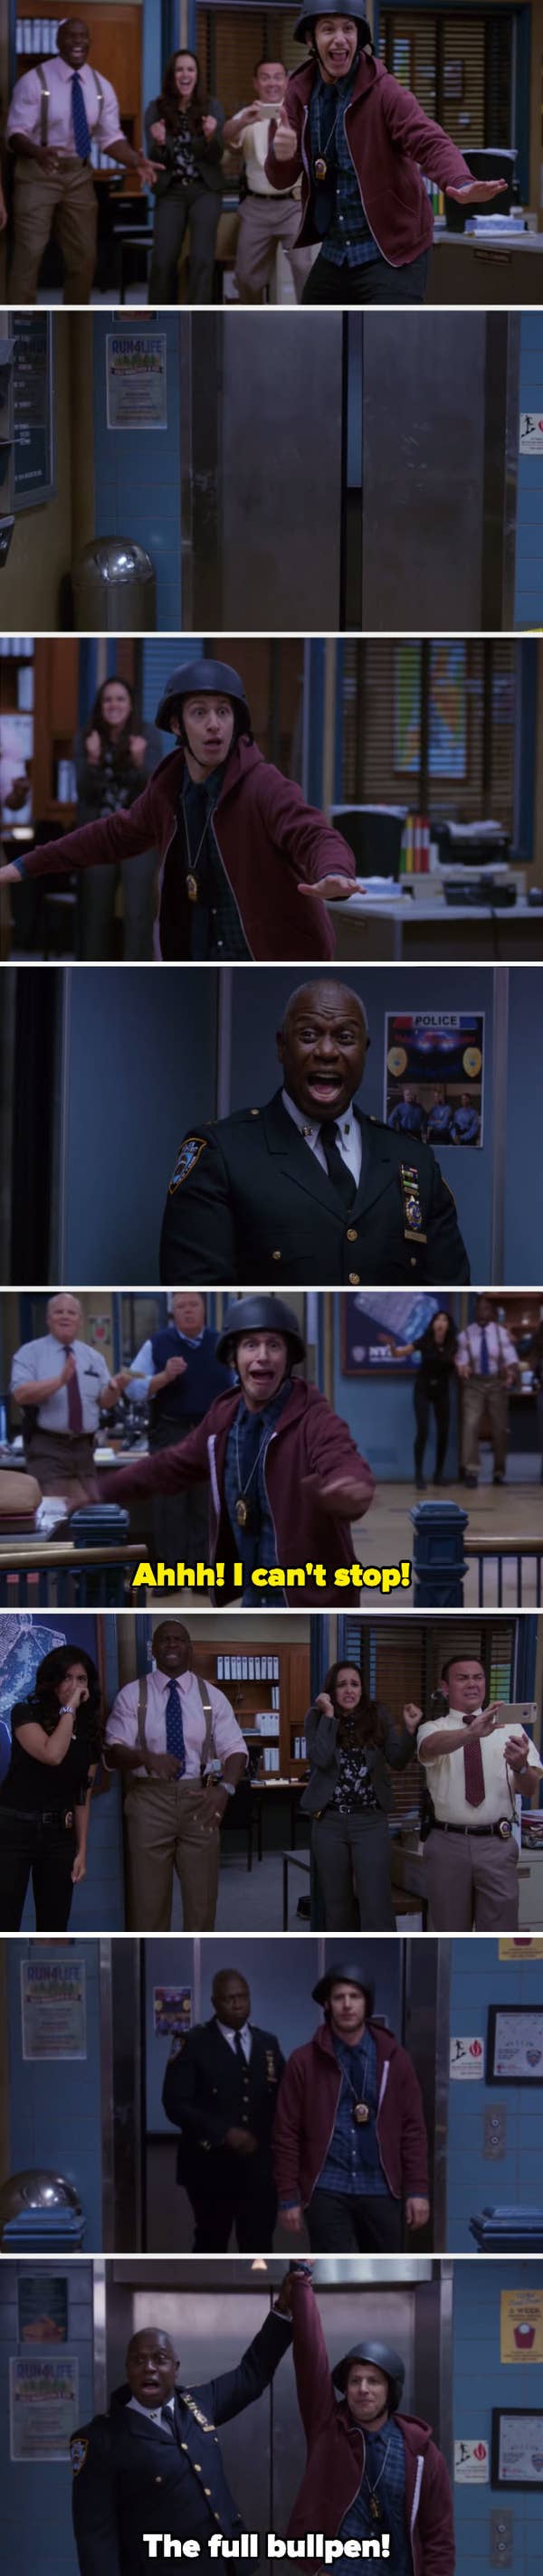 Brooklyn Nine-Nine: 23 Best Cold Opens That Are Hilarious